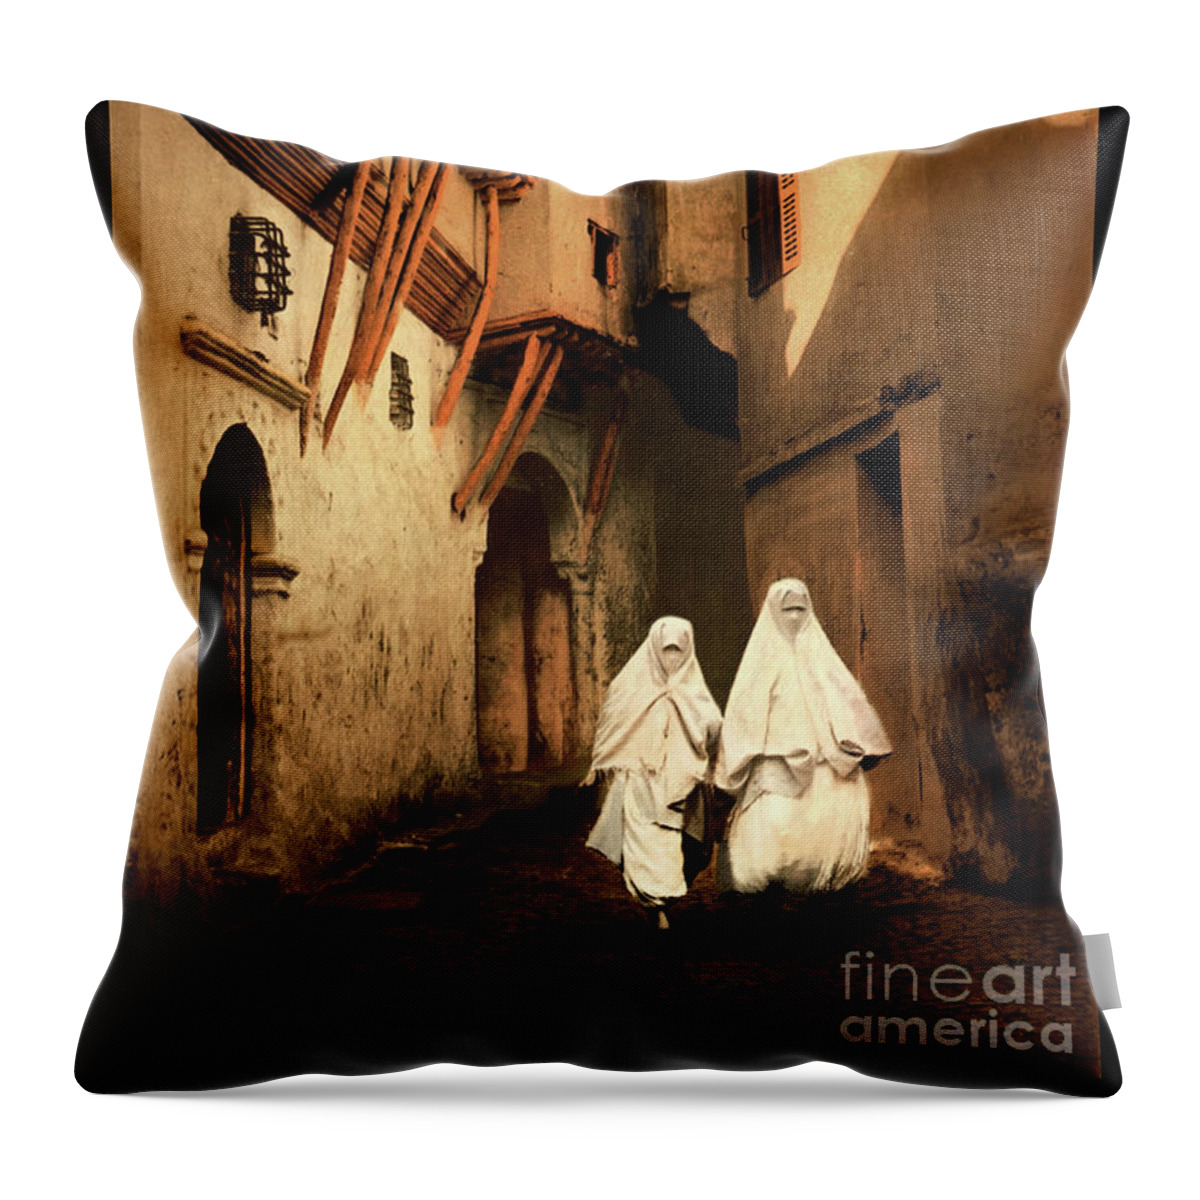 Pattern Throw Pillow featuring the photograph Red Sea Street in Algiers by Carlos Diaz